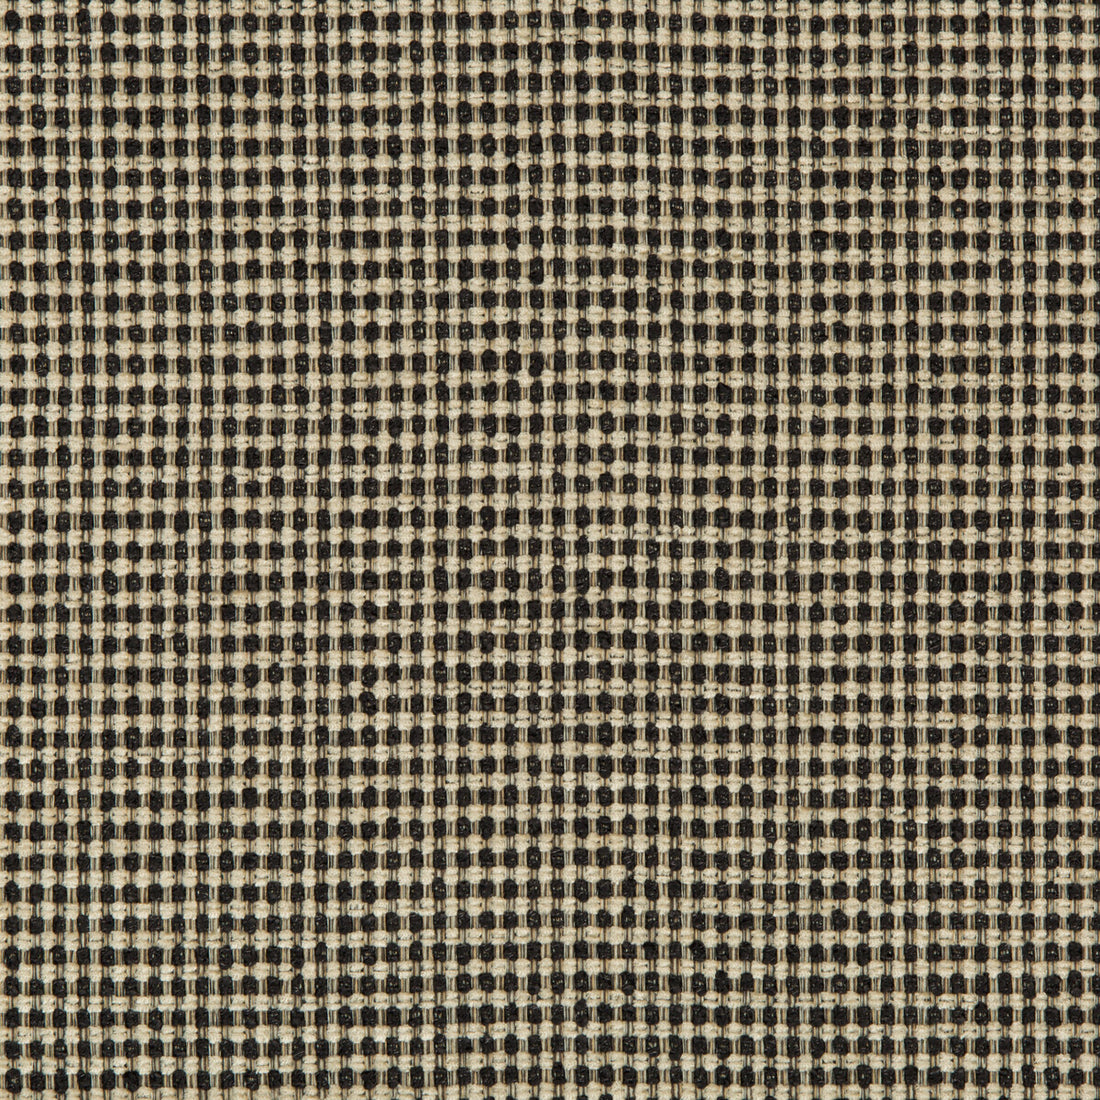 Kravet Design fabric in 35029-11 color - pattern 35029.11.0 - by Kravet Design in the Performance Crypton Home collection